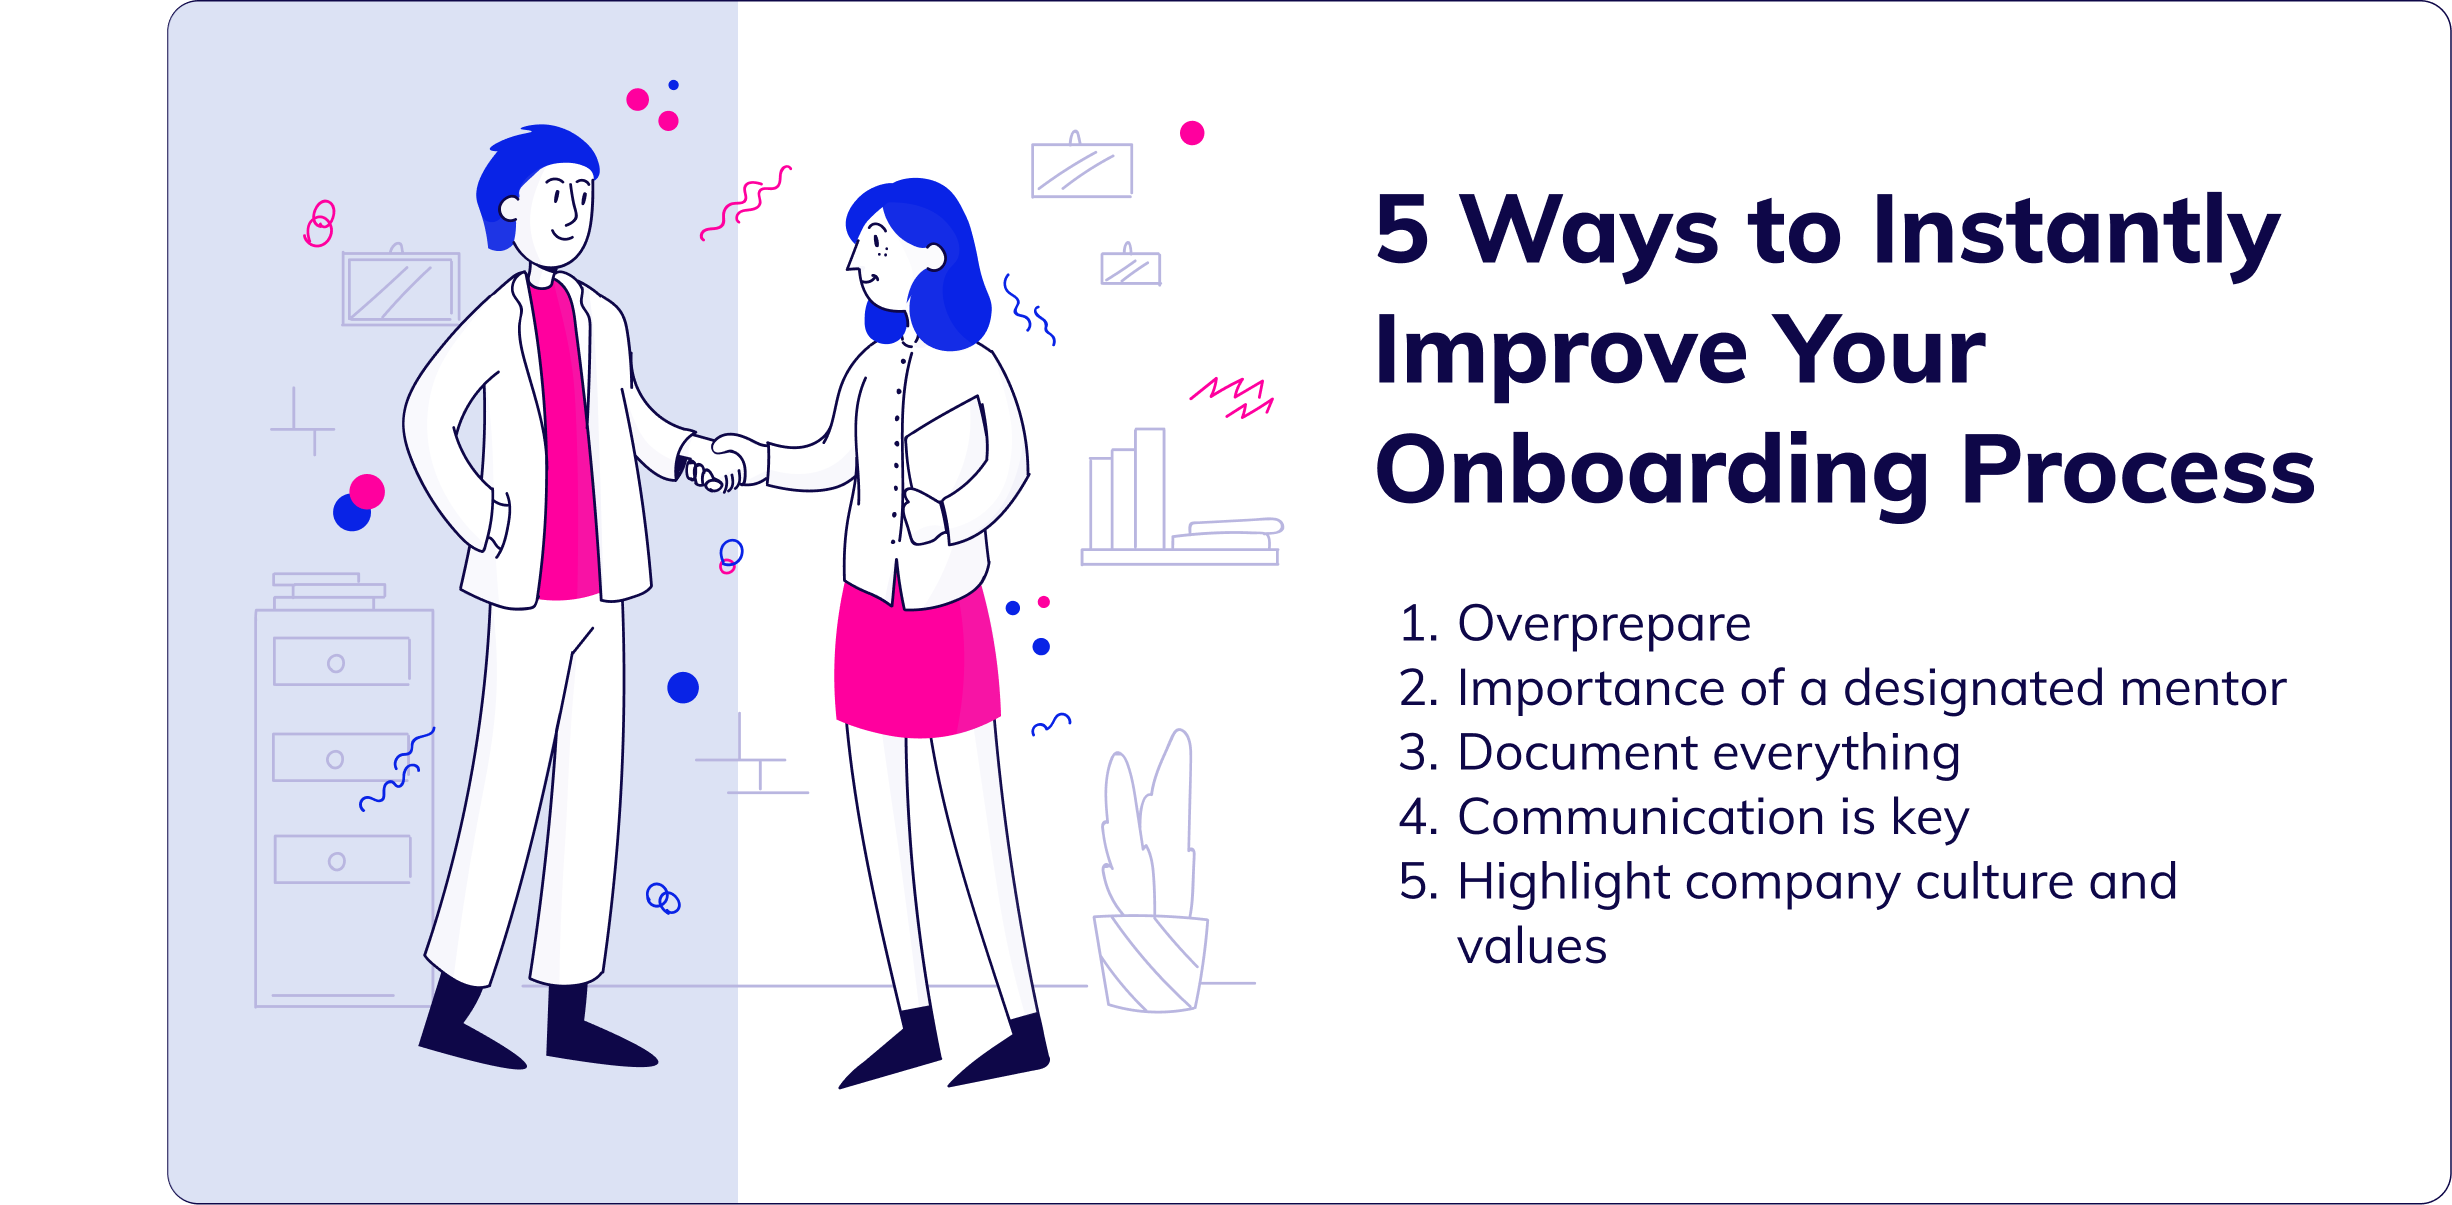 5 Ways To Instantly Improve Your Onboarding Process